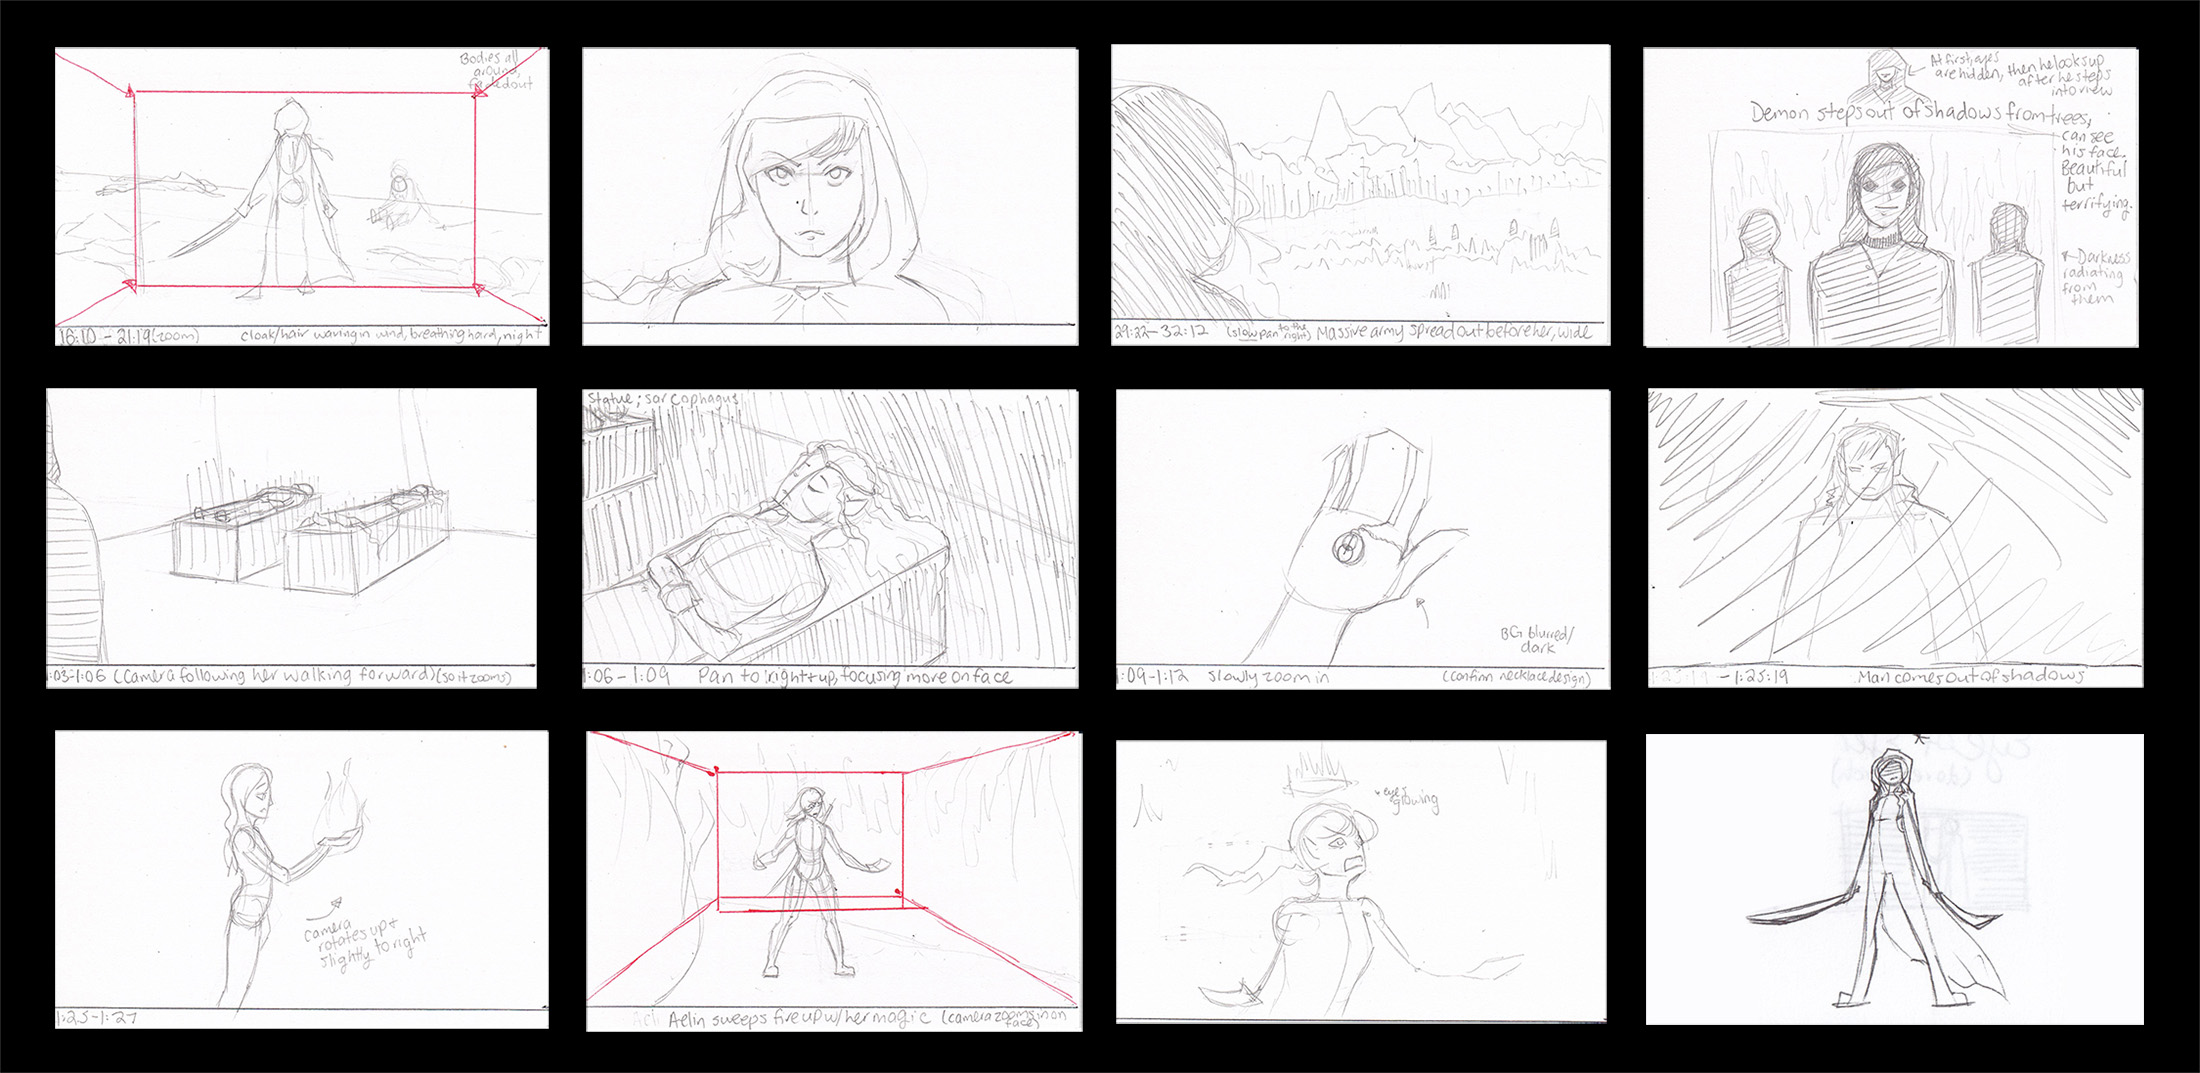 Black background with sketches arranged in rows and columns. Heroine before, during, and after battle. Facing villains – dark demons. Finding an amulet from a goddess. A strong character moves out of the shadows. Heroine discovers her powers of fire magic, uses them for good against the evil. Heroine holding swords.